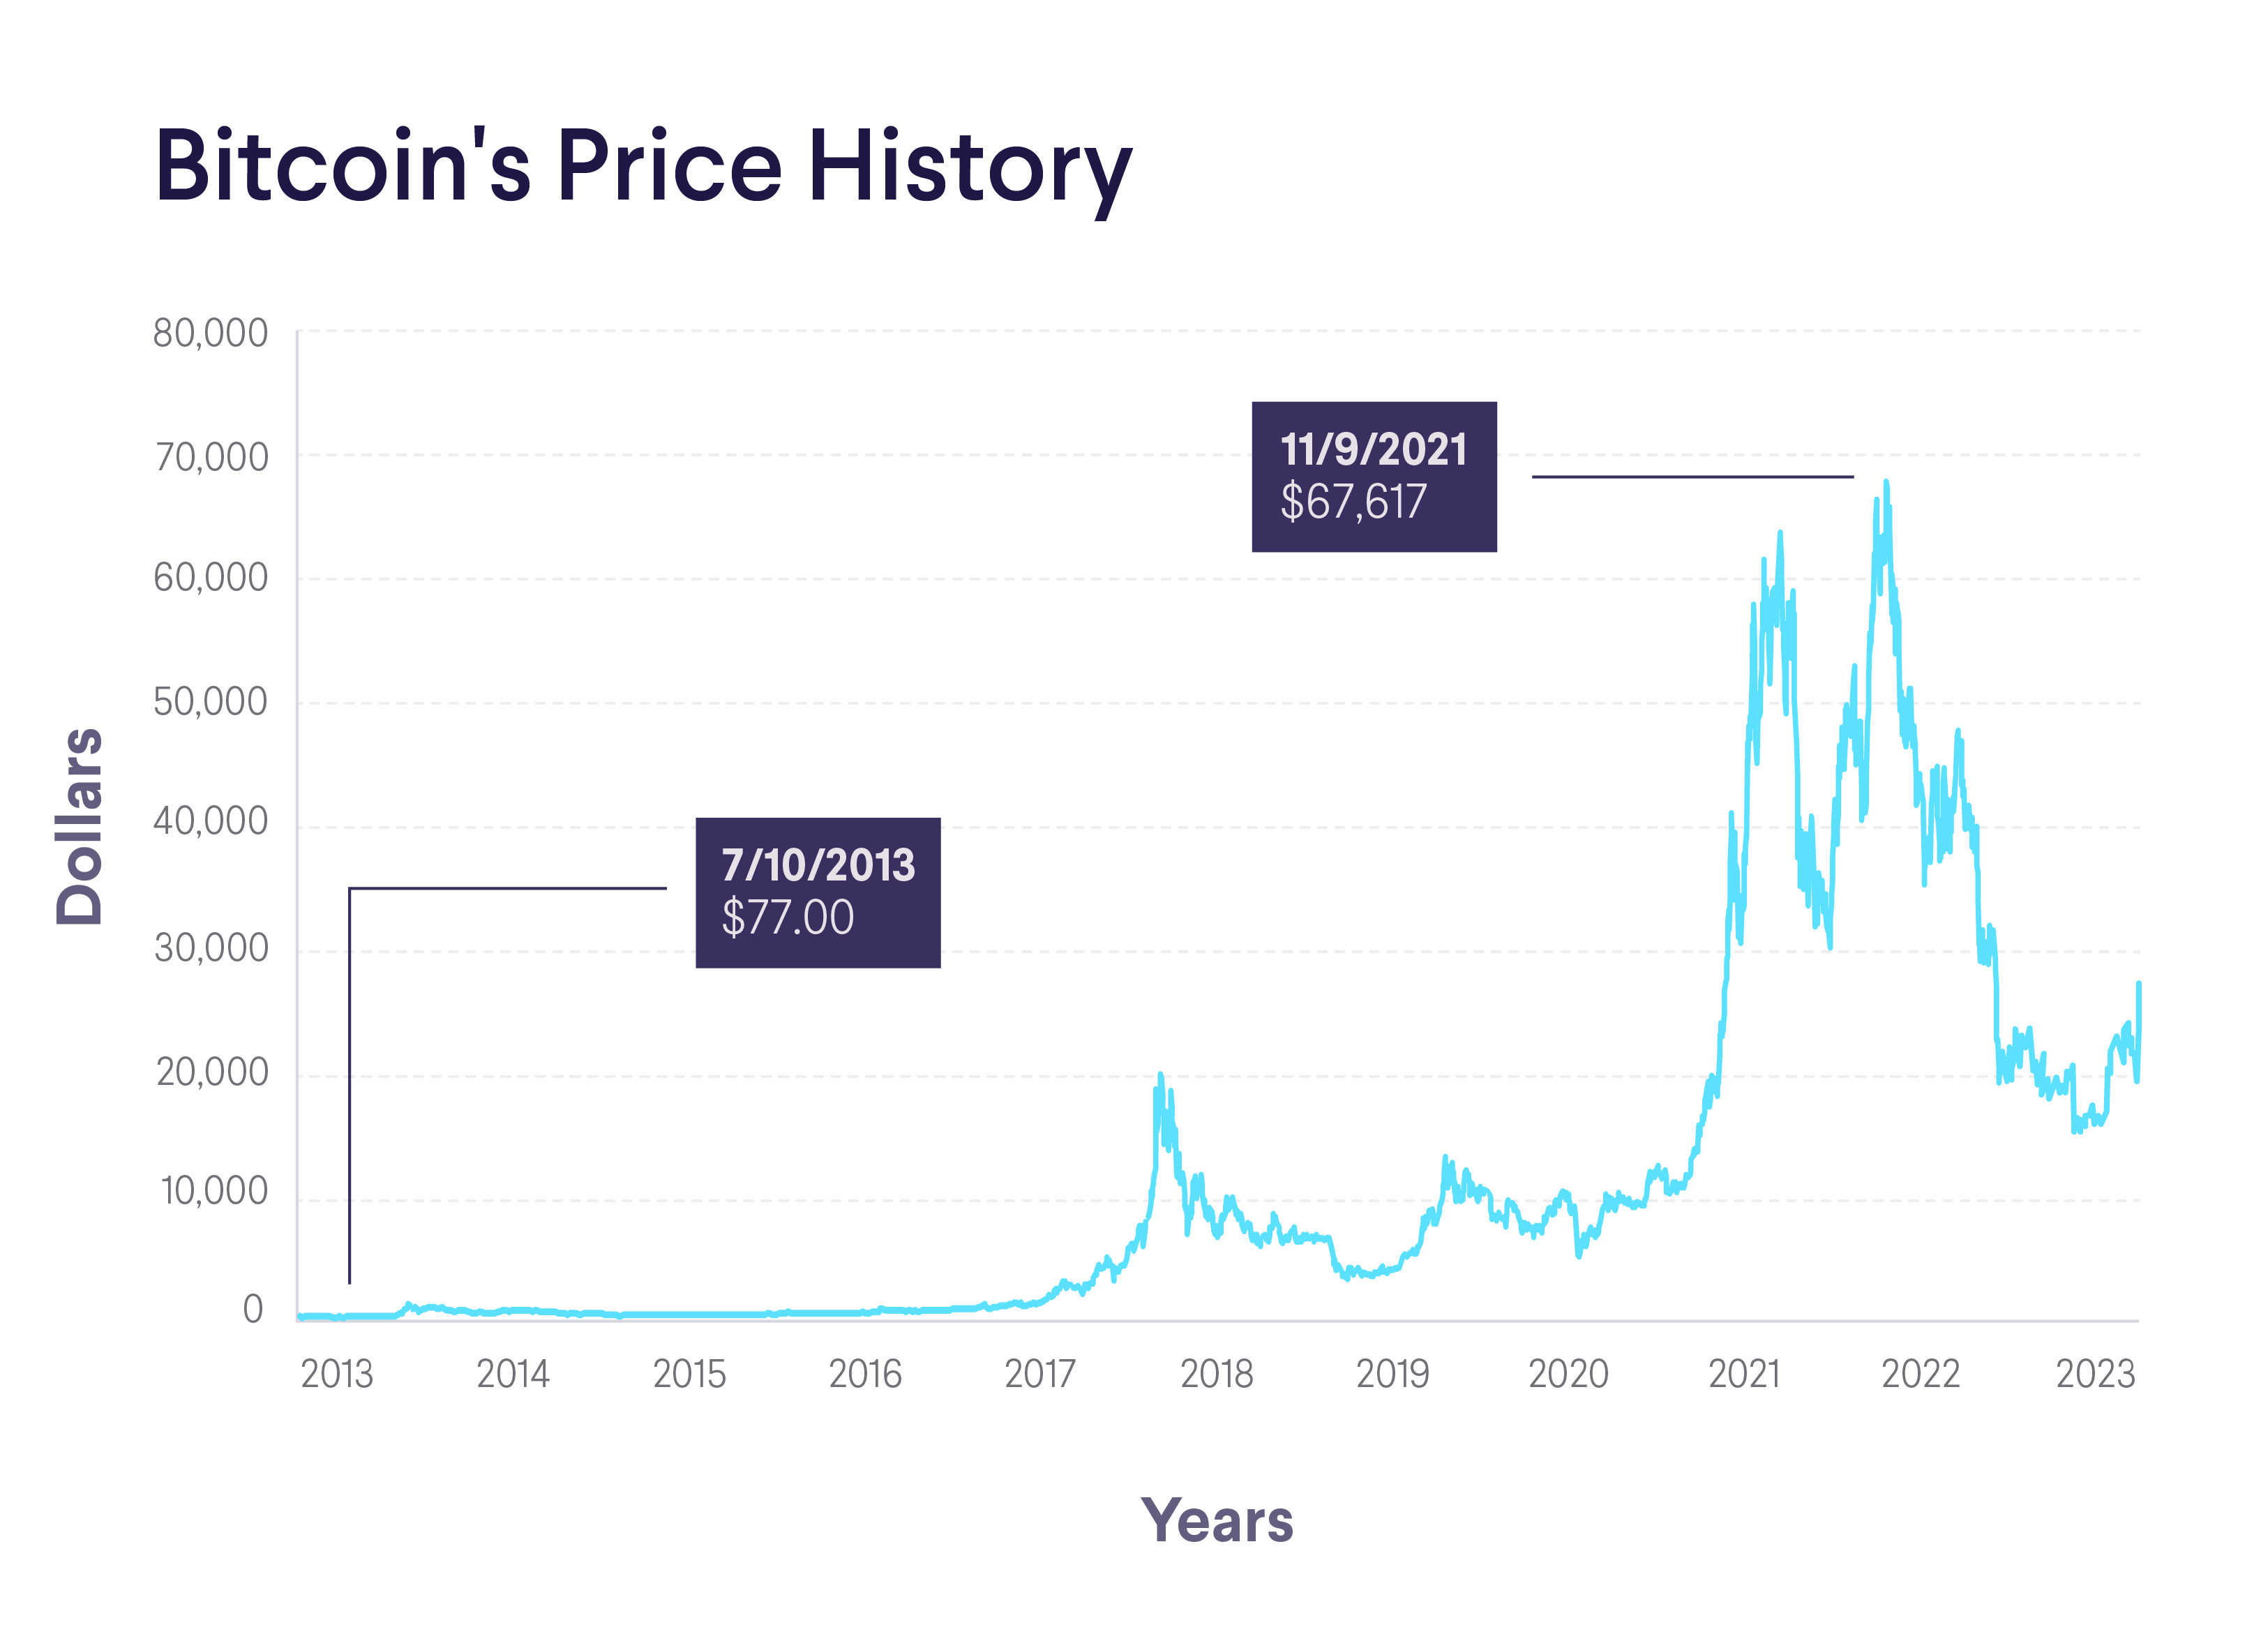 $1 invested in Bitcoin 10 year ago would have earned you this much by now